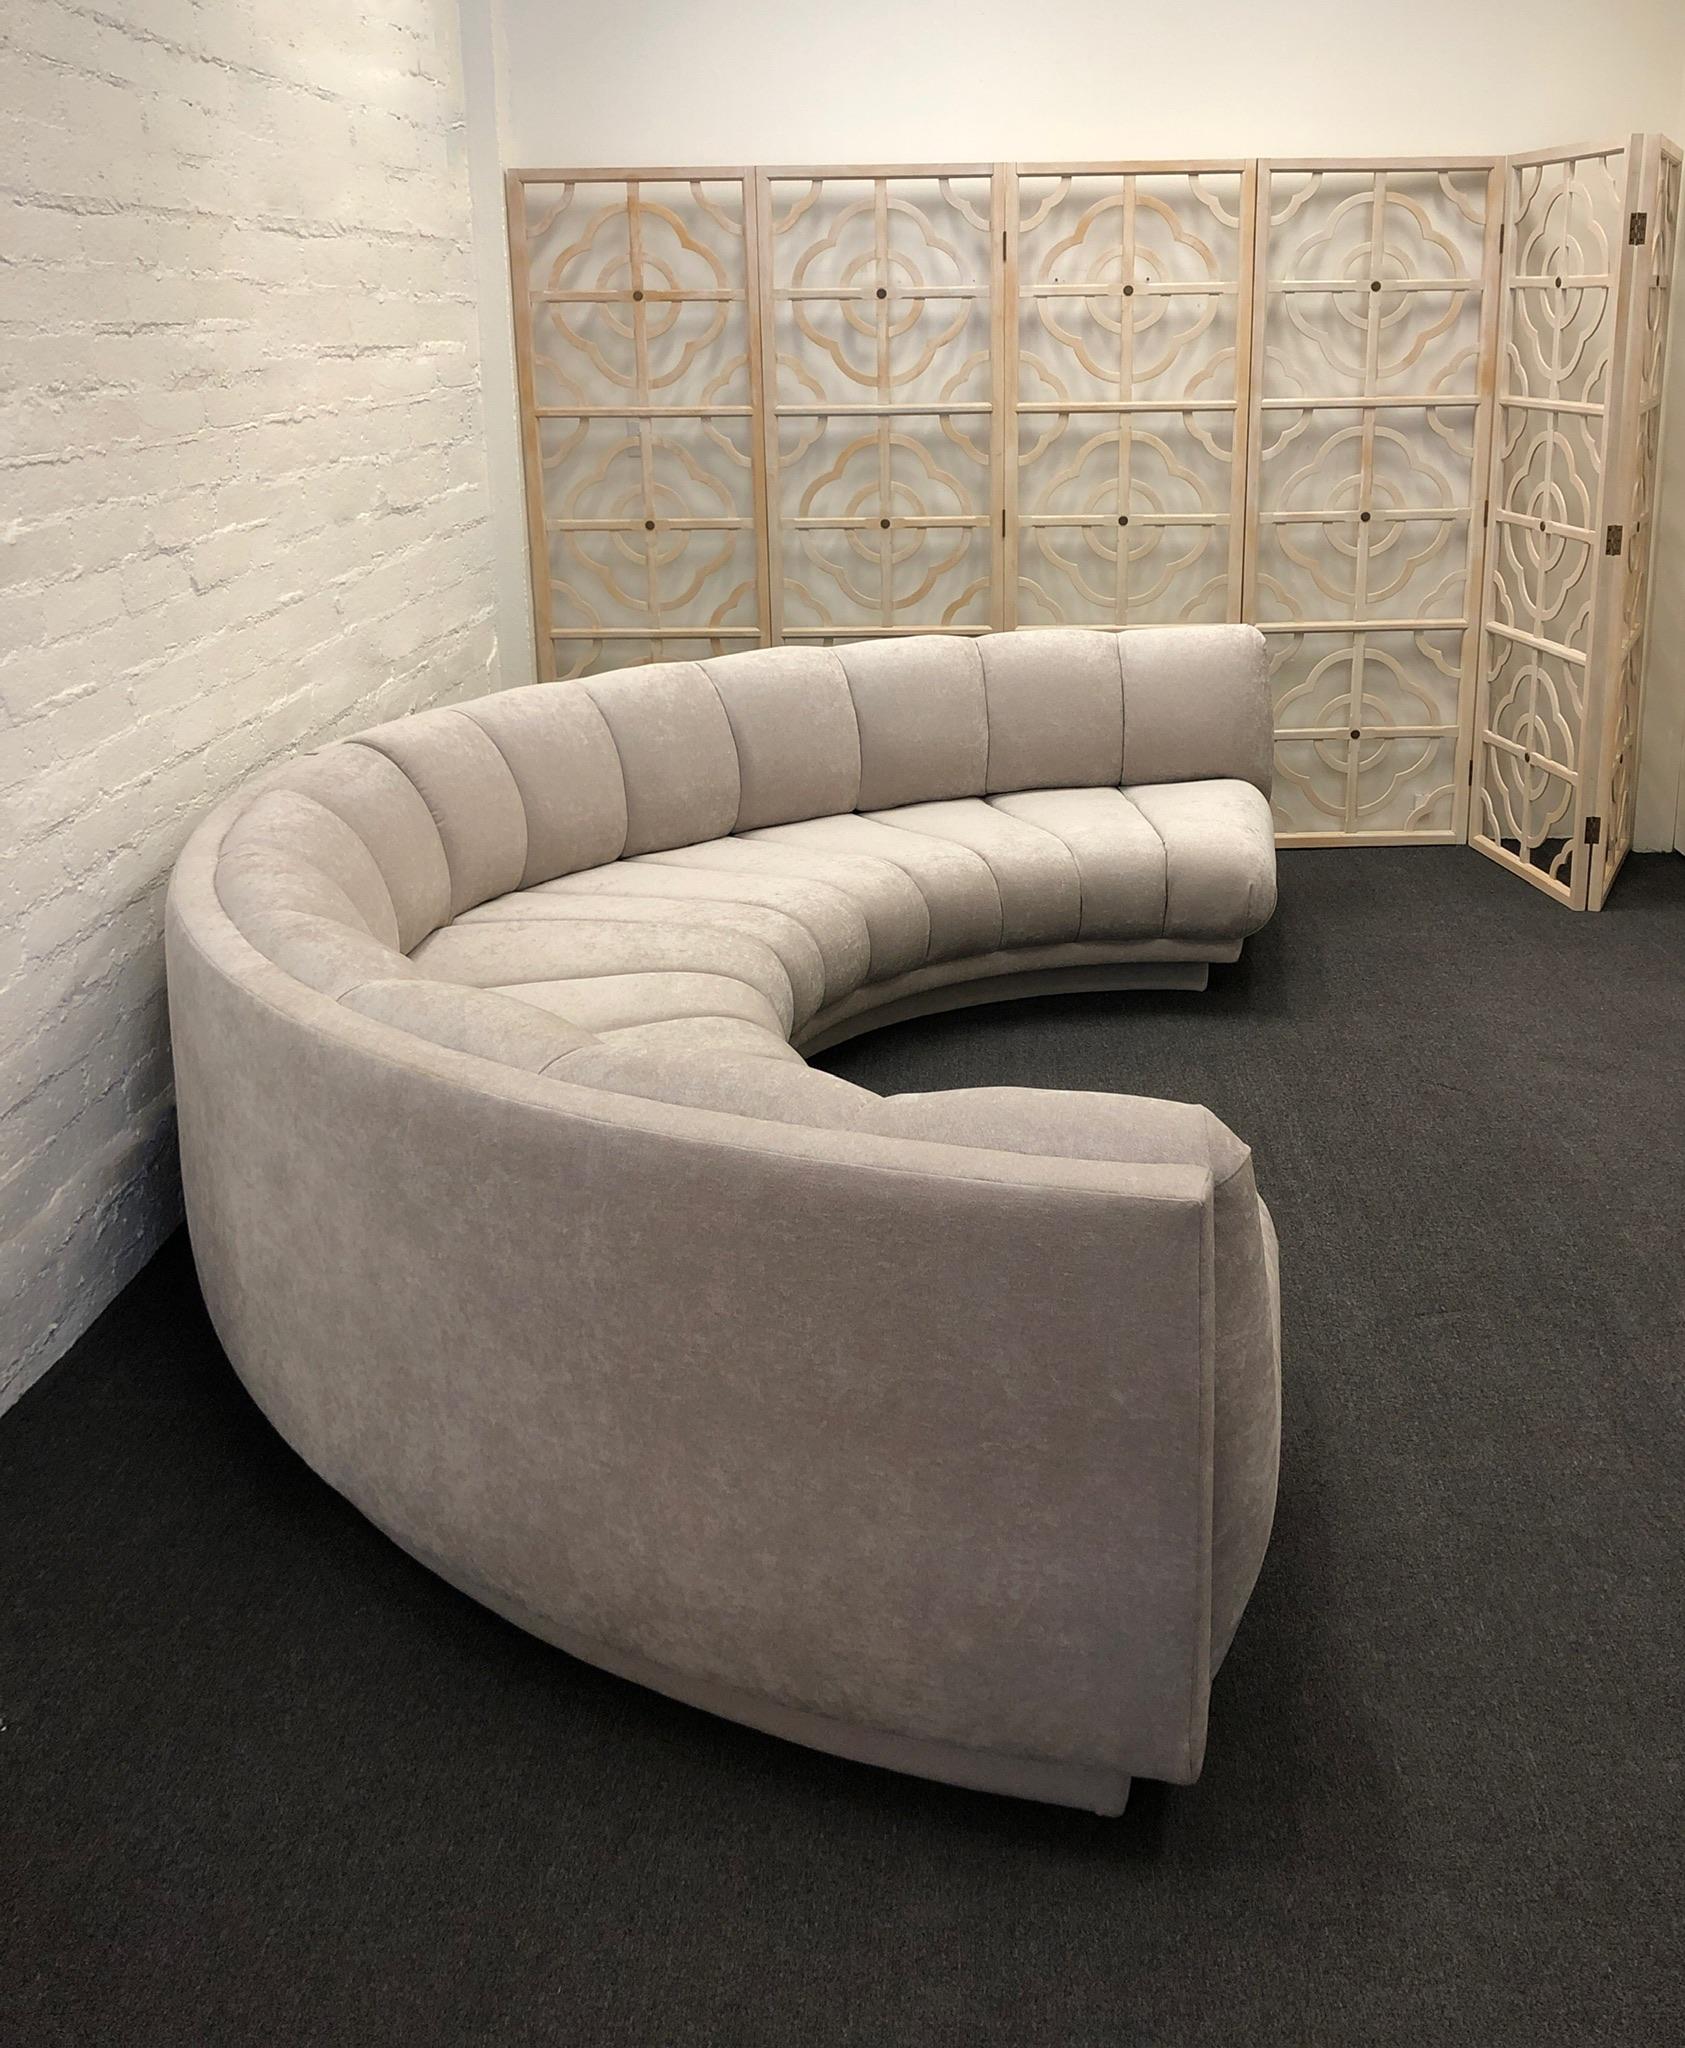 1990’s Glamorous off white channel two piece half circle sectional sofa by Steve chase.
Newly recovered in a soft off white chenille fabric. 
Overall dimensions: 155” Wide, 80” Deep, 33” Deep and 18” Seat.